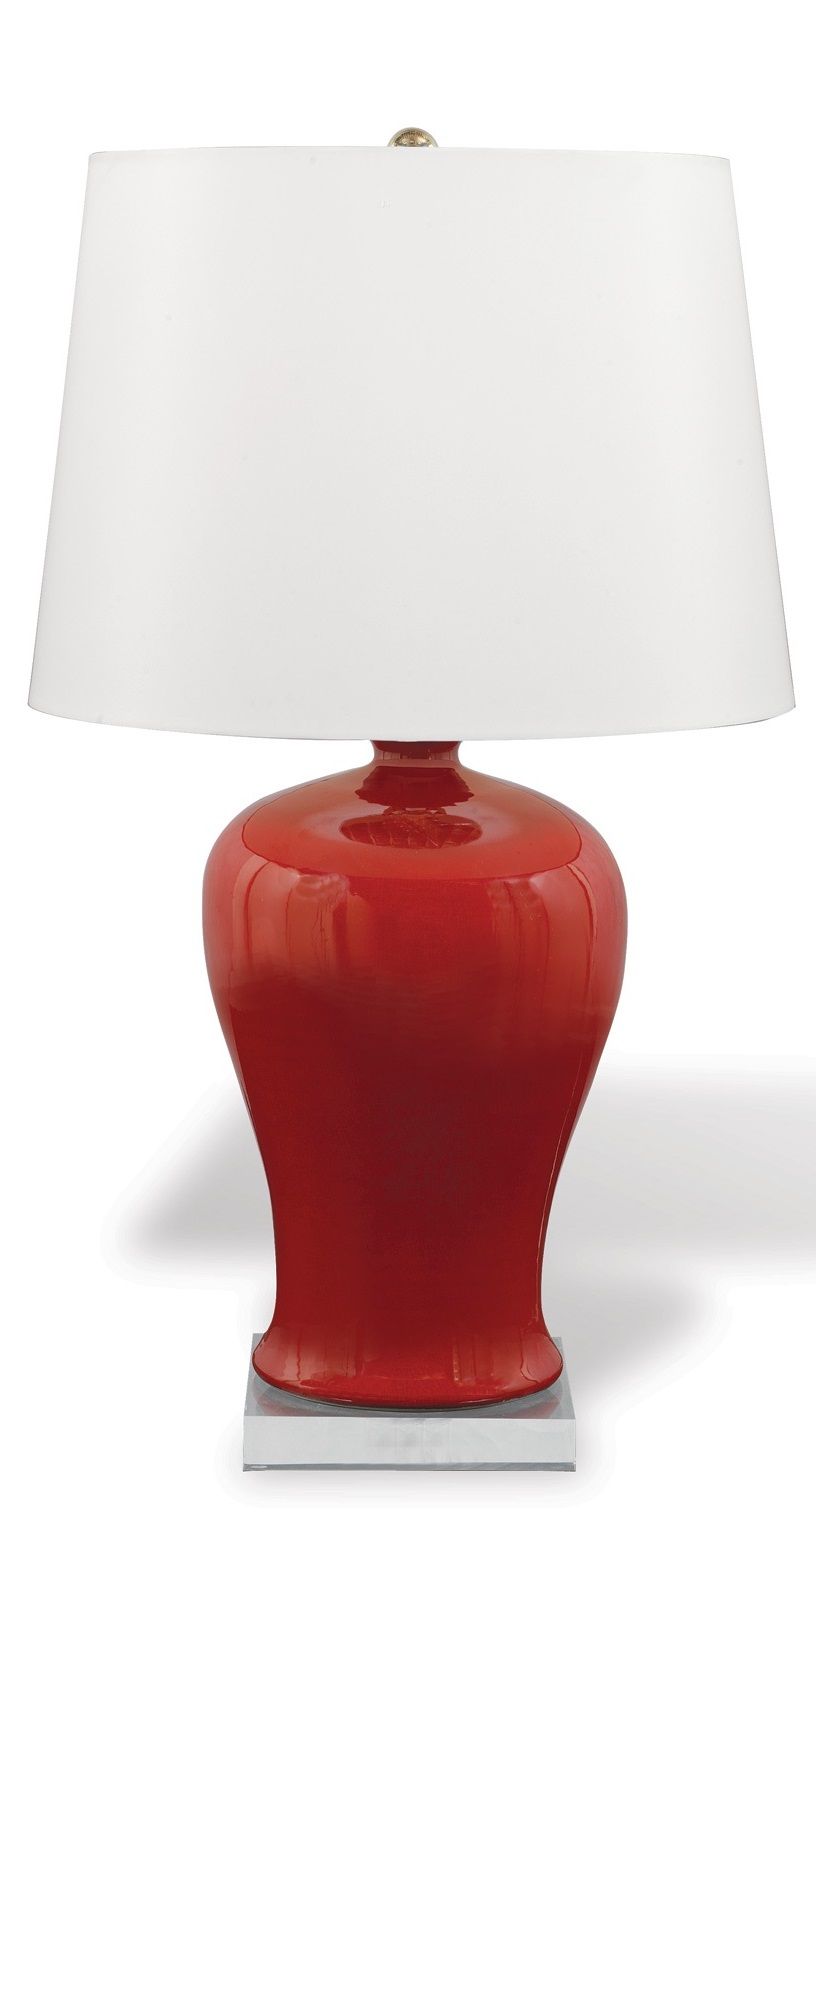 Red table lamp for your room